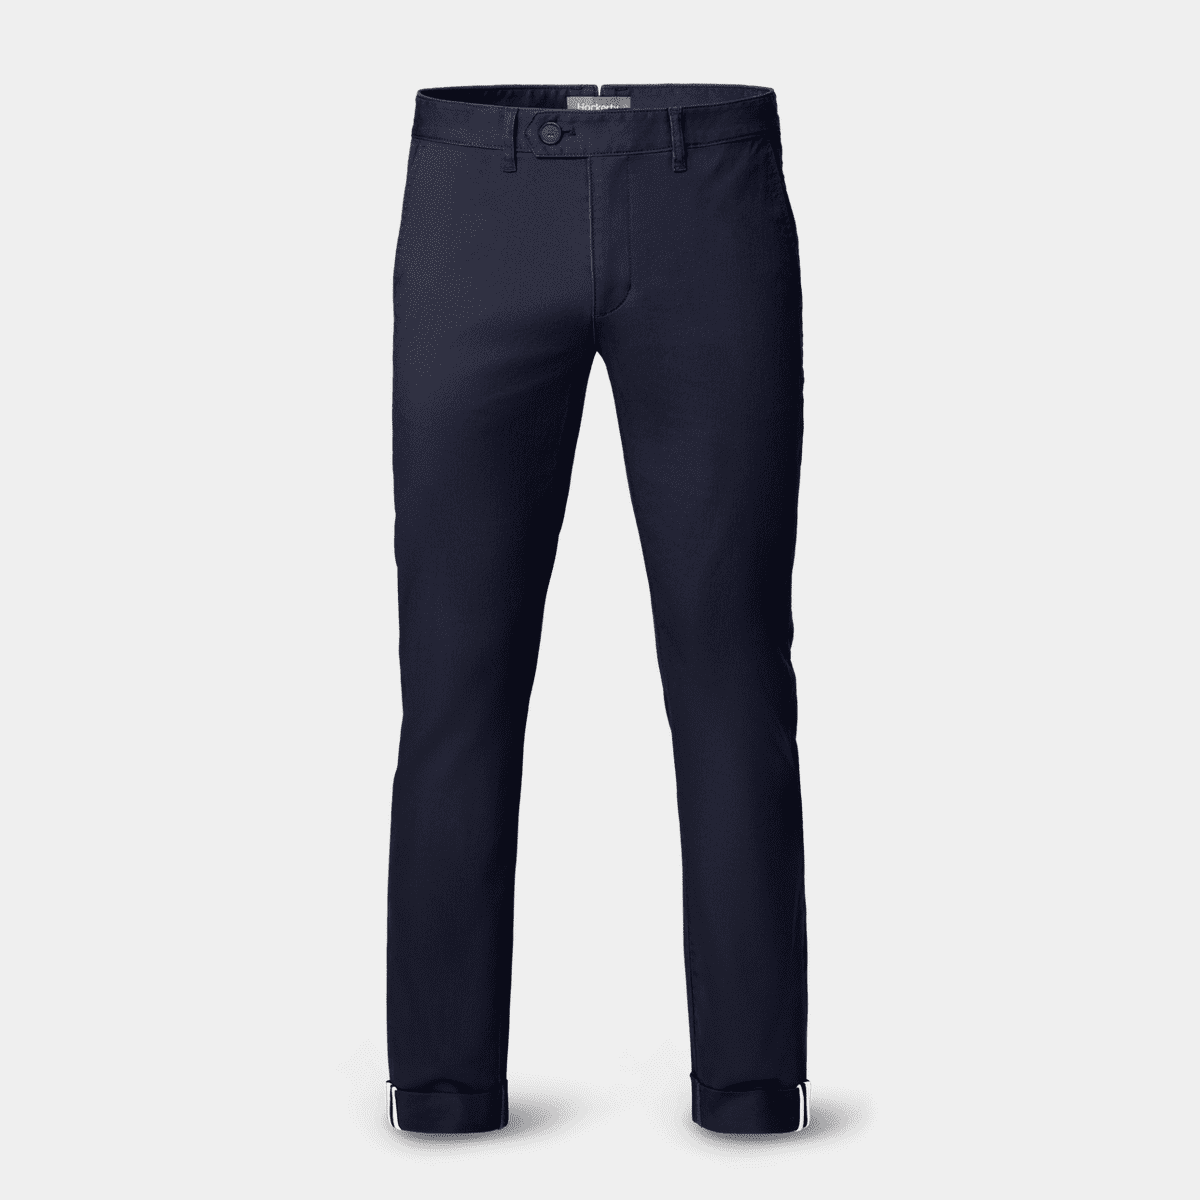 Dark Blue rolled up slim fit Chino pants